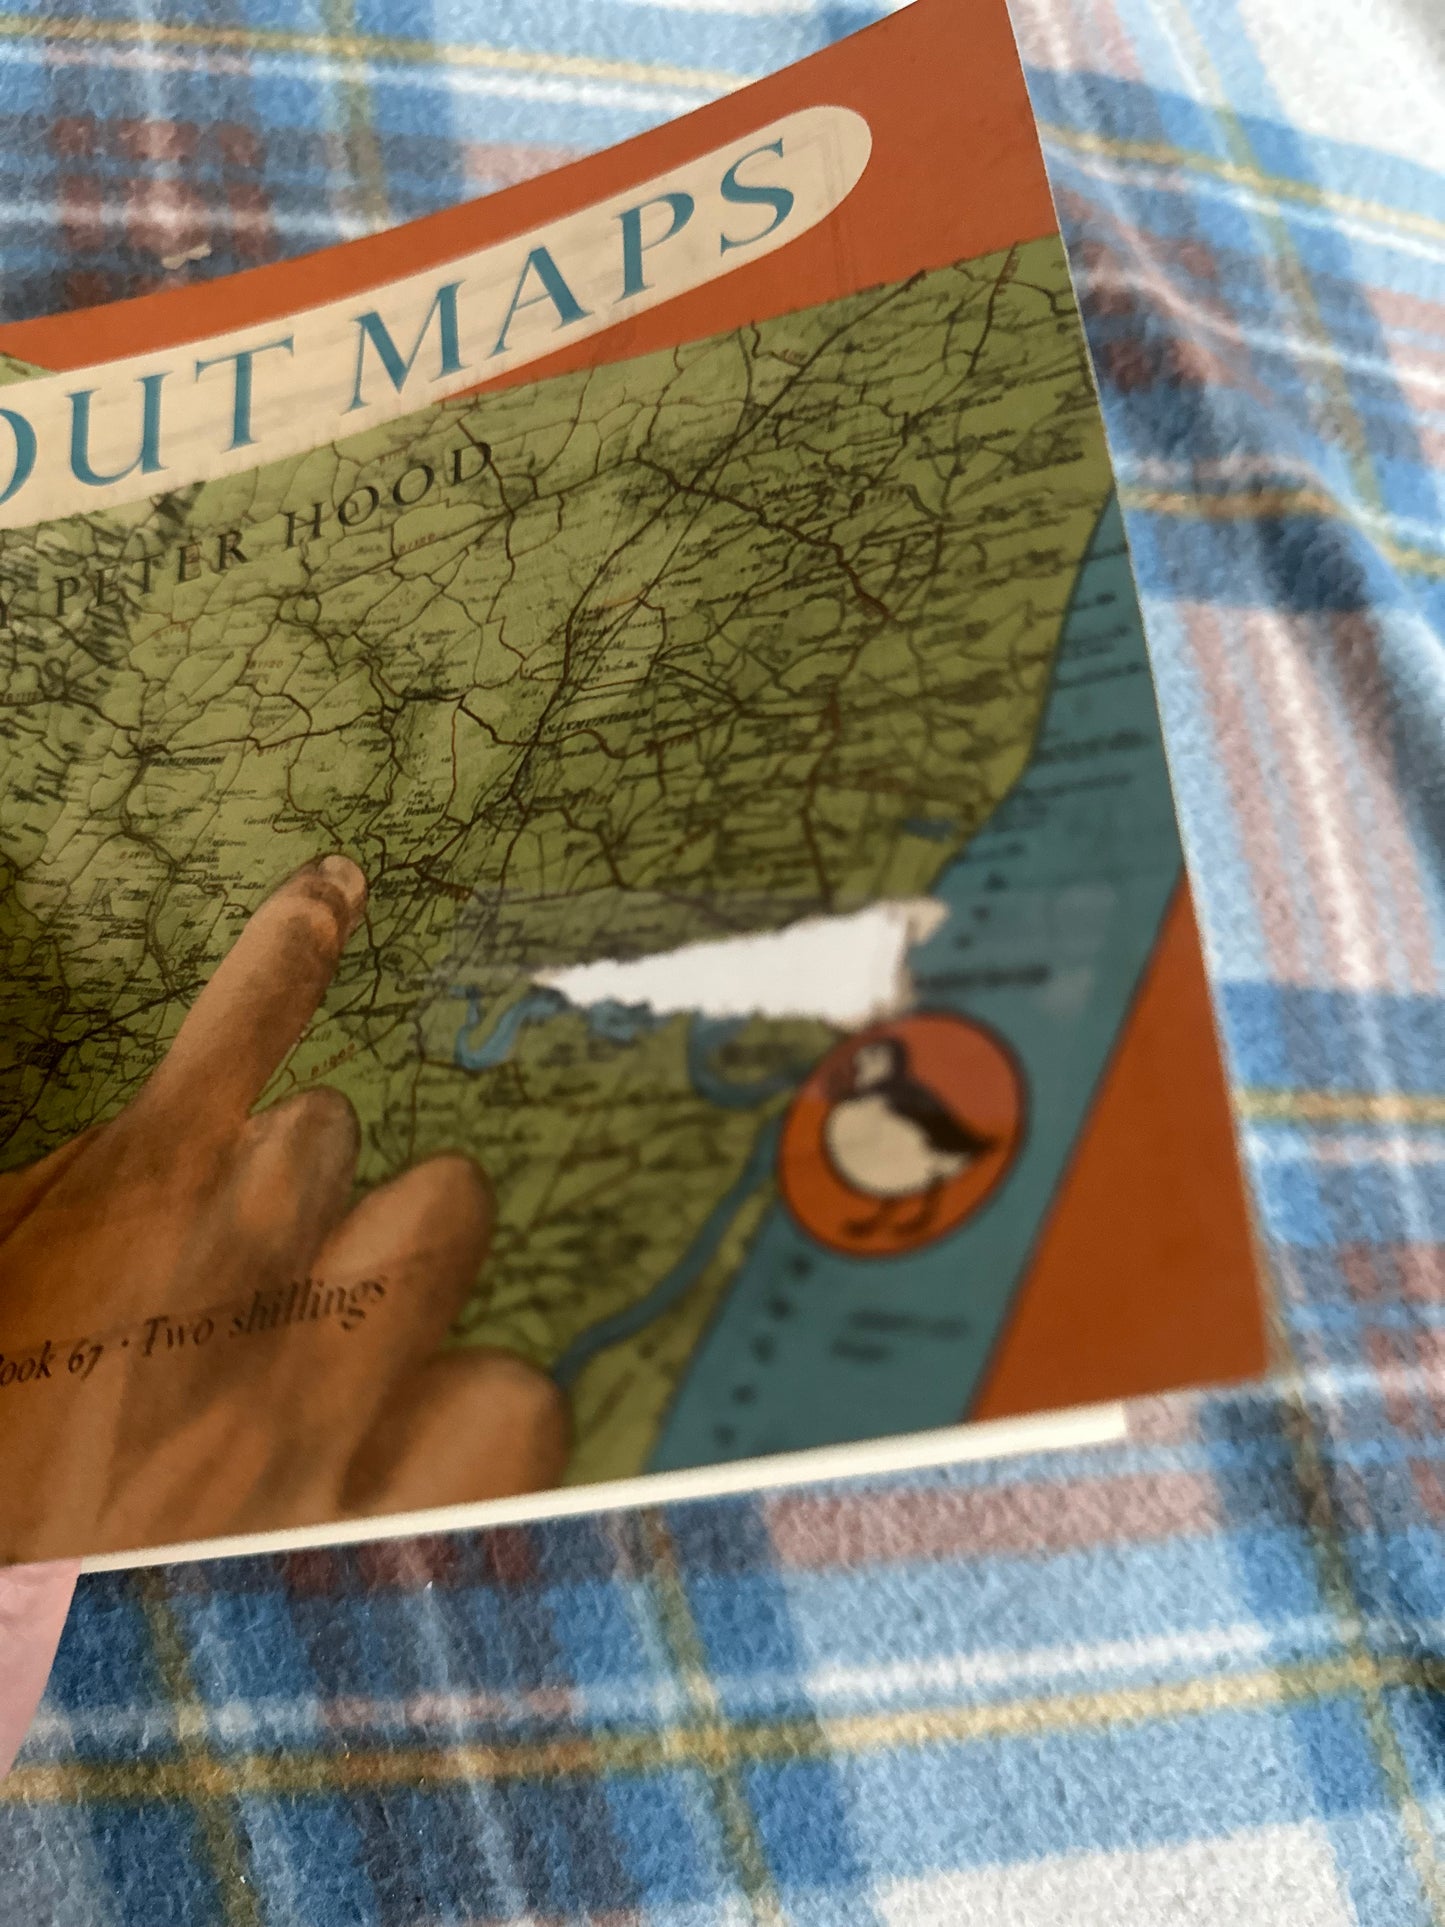 1950*1st* About Maps - Peter Hood(Puffin Picture Books 67)